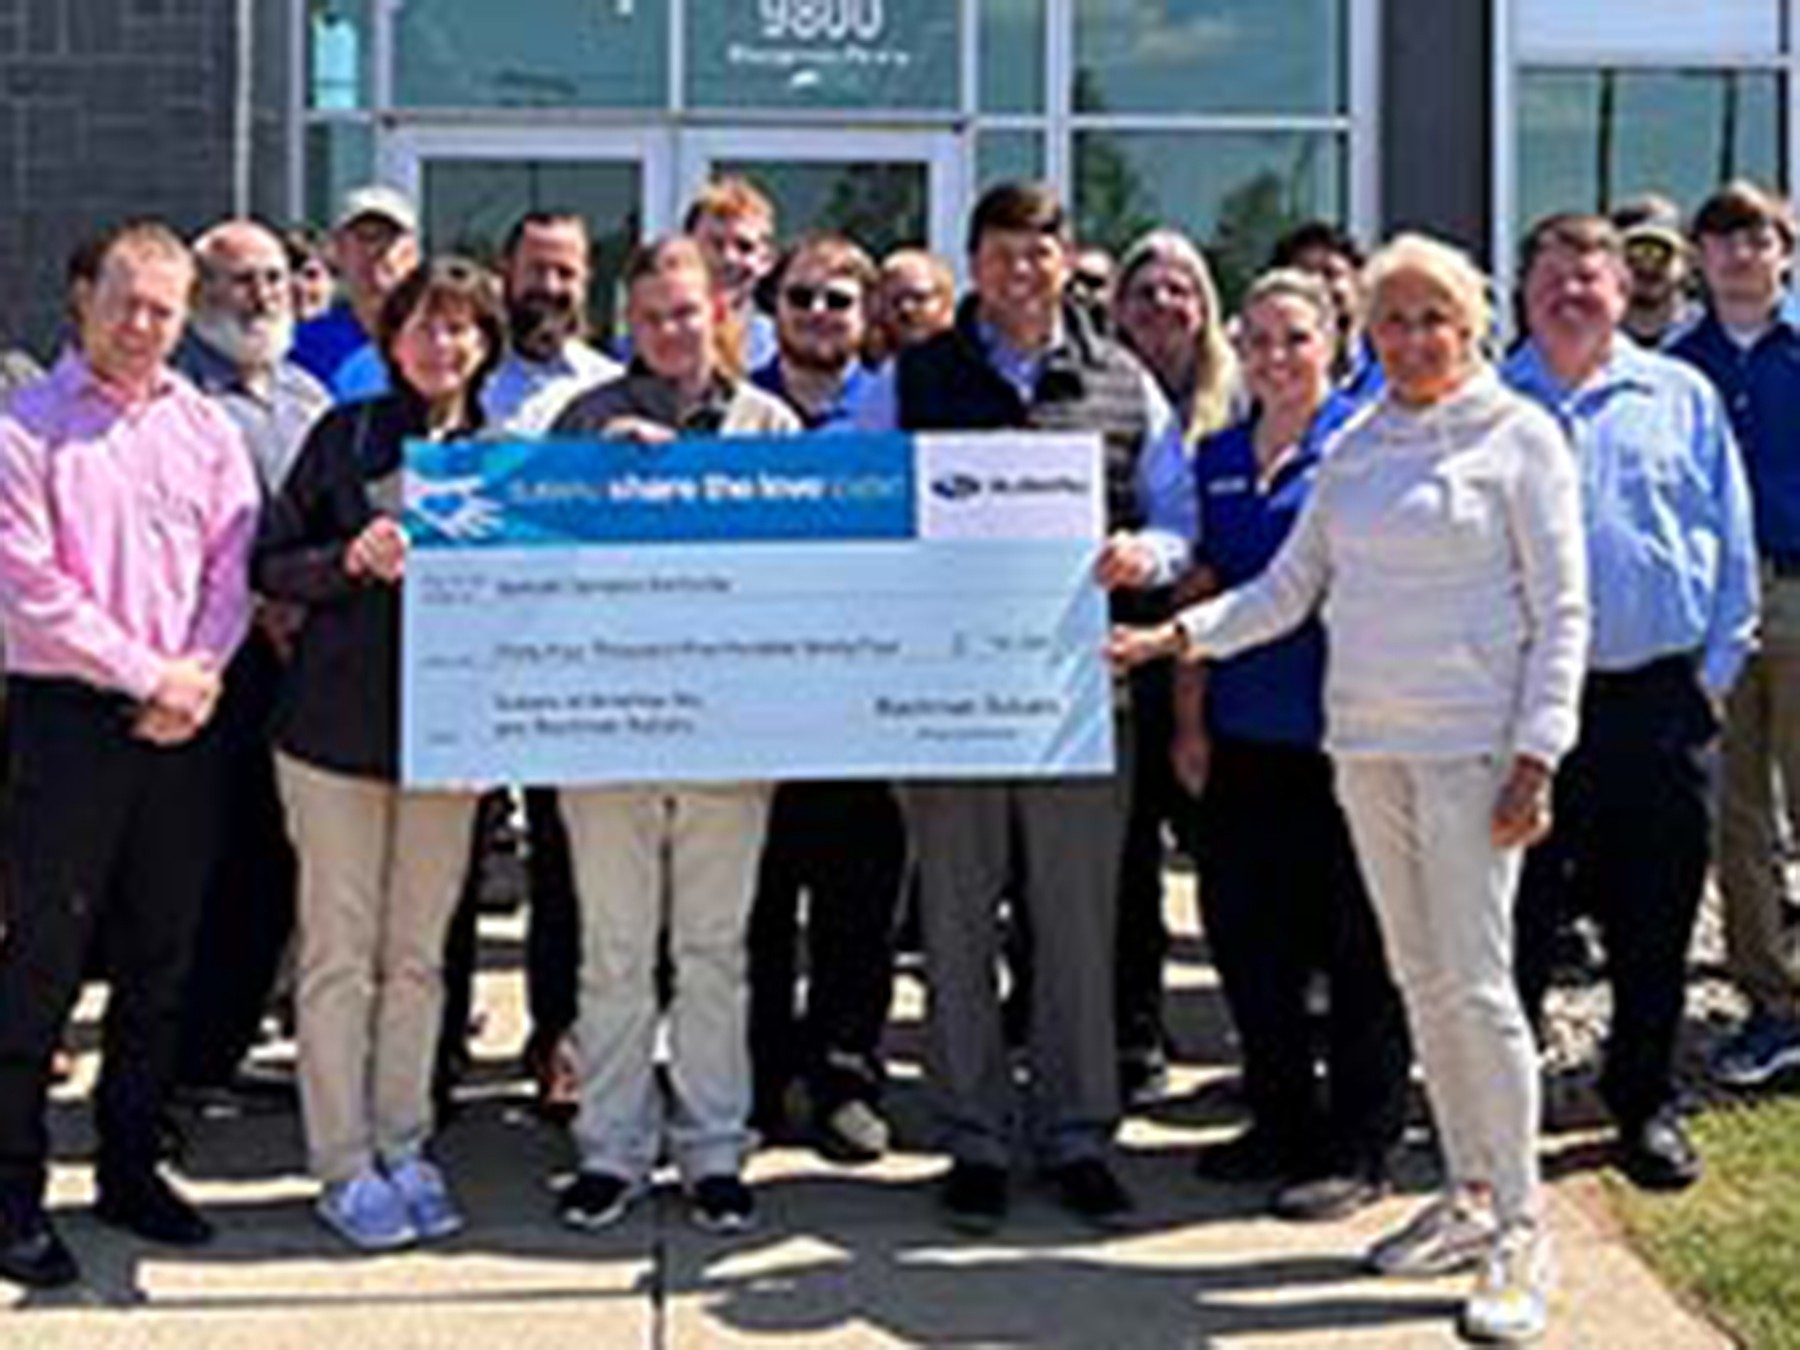 Bachman Subaru team presenting the 2022 Share the Love check to Special Olympics athletes and CEO.